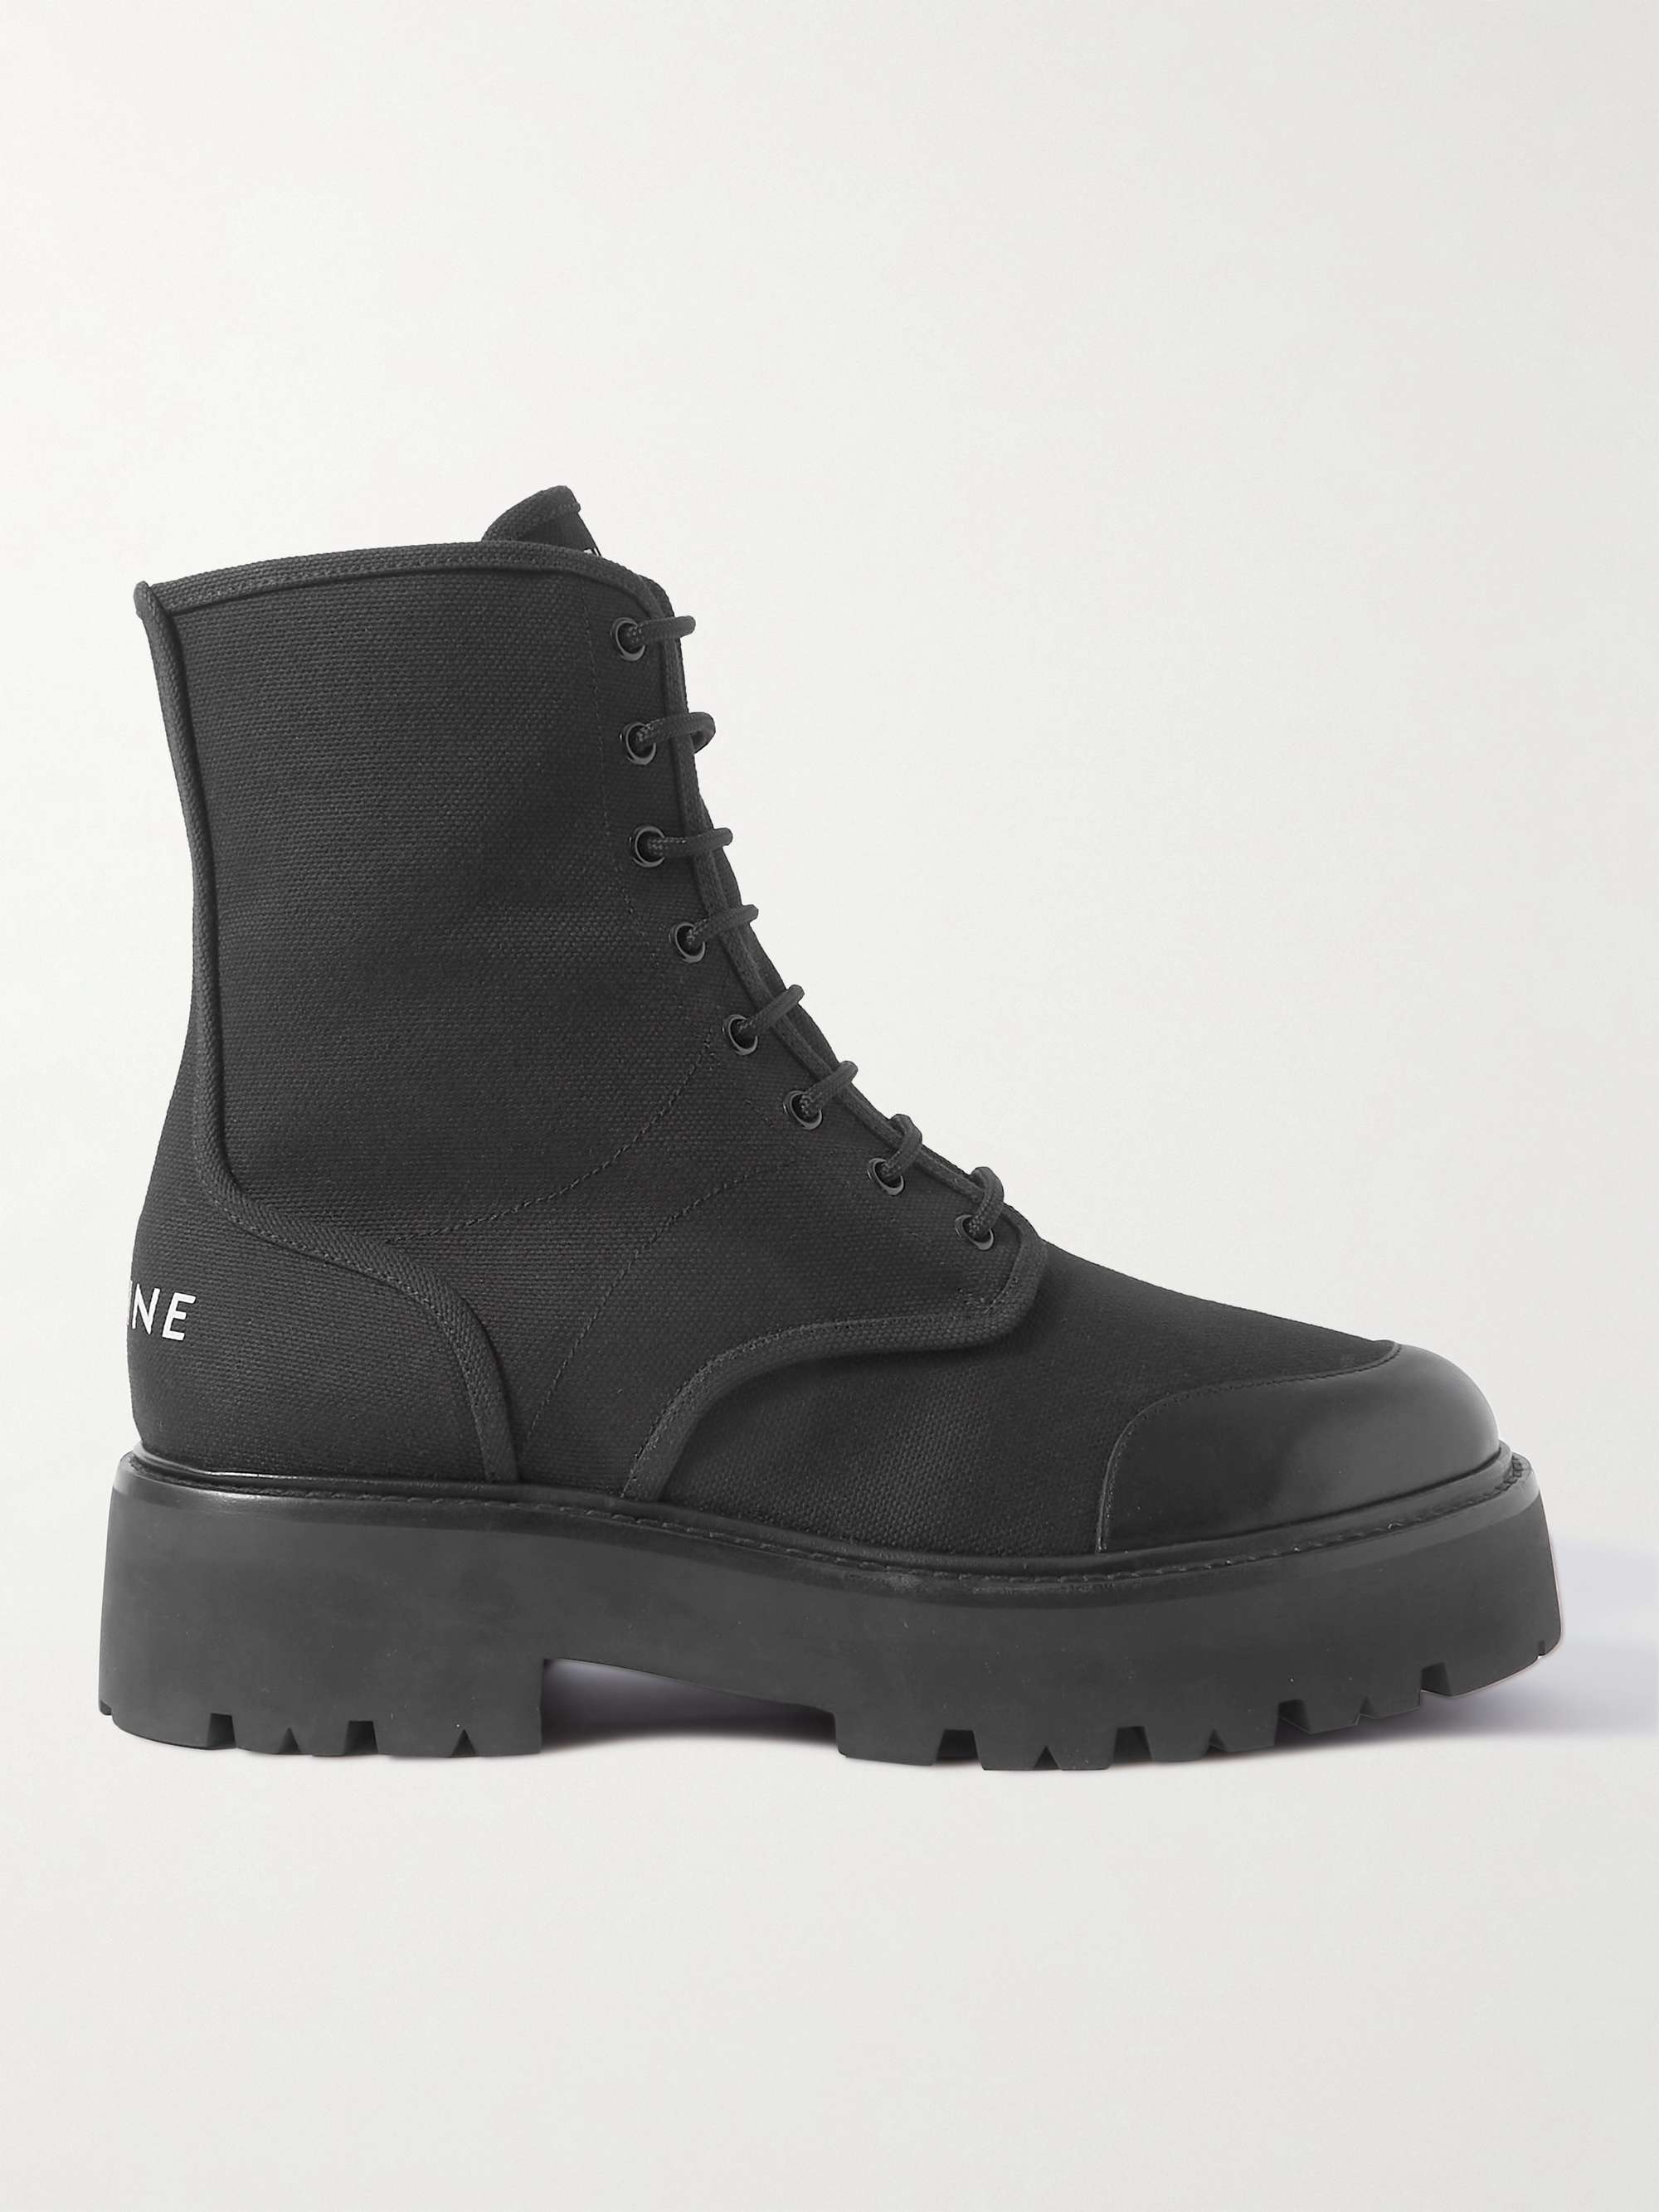 CELINE HOMME Leather-Trimmed Canvas Boots